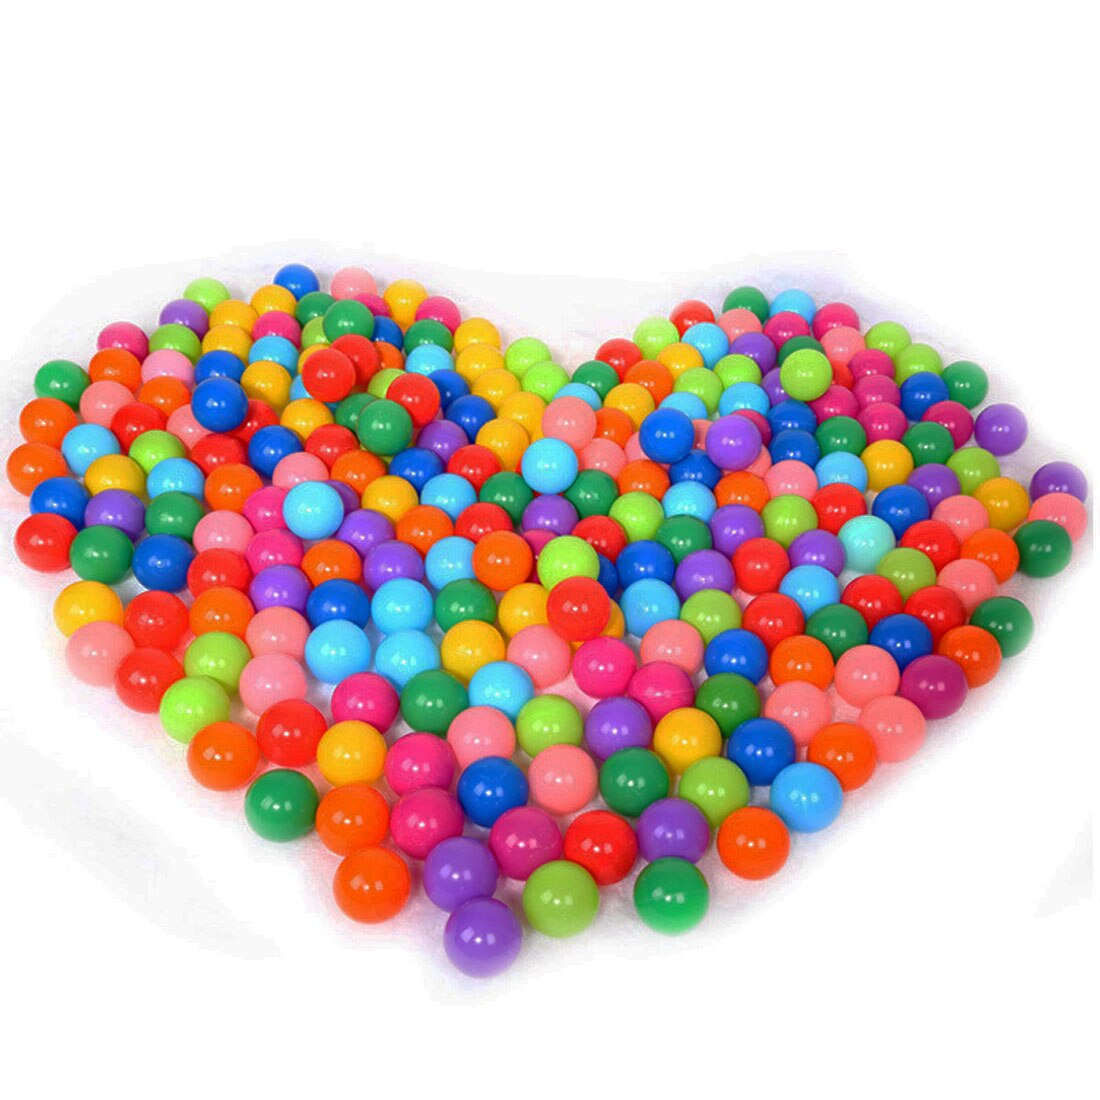 100pcs/200pcs/bag Eco-Friendly 6 Bright Colors Soft Plastic Water Pool Ocean Wave Ball in Mesh Bag with Zipper Baby Funny